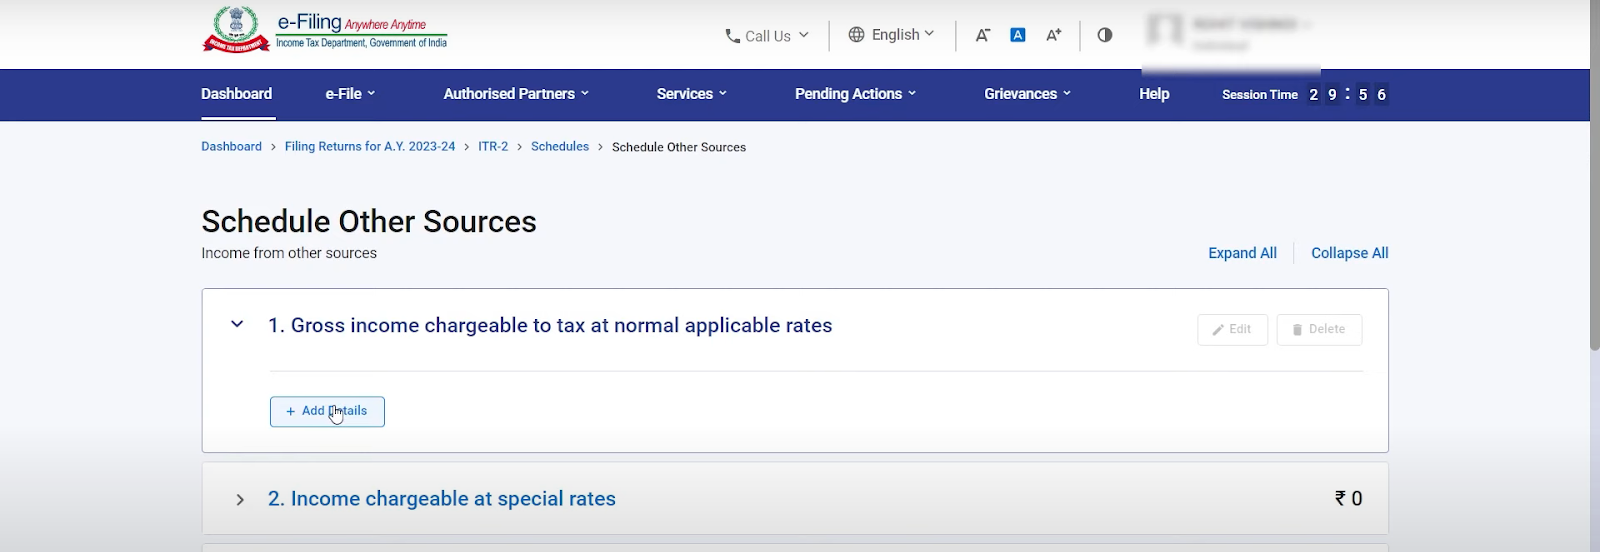 So, under gross income chargeable to tax at normal applicable rates, click on add details.